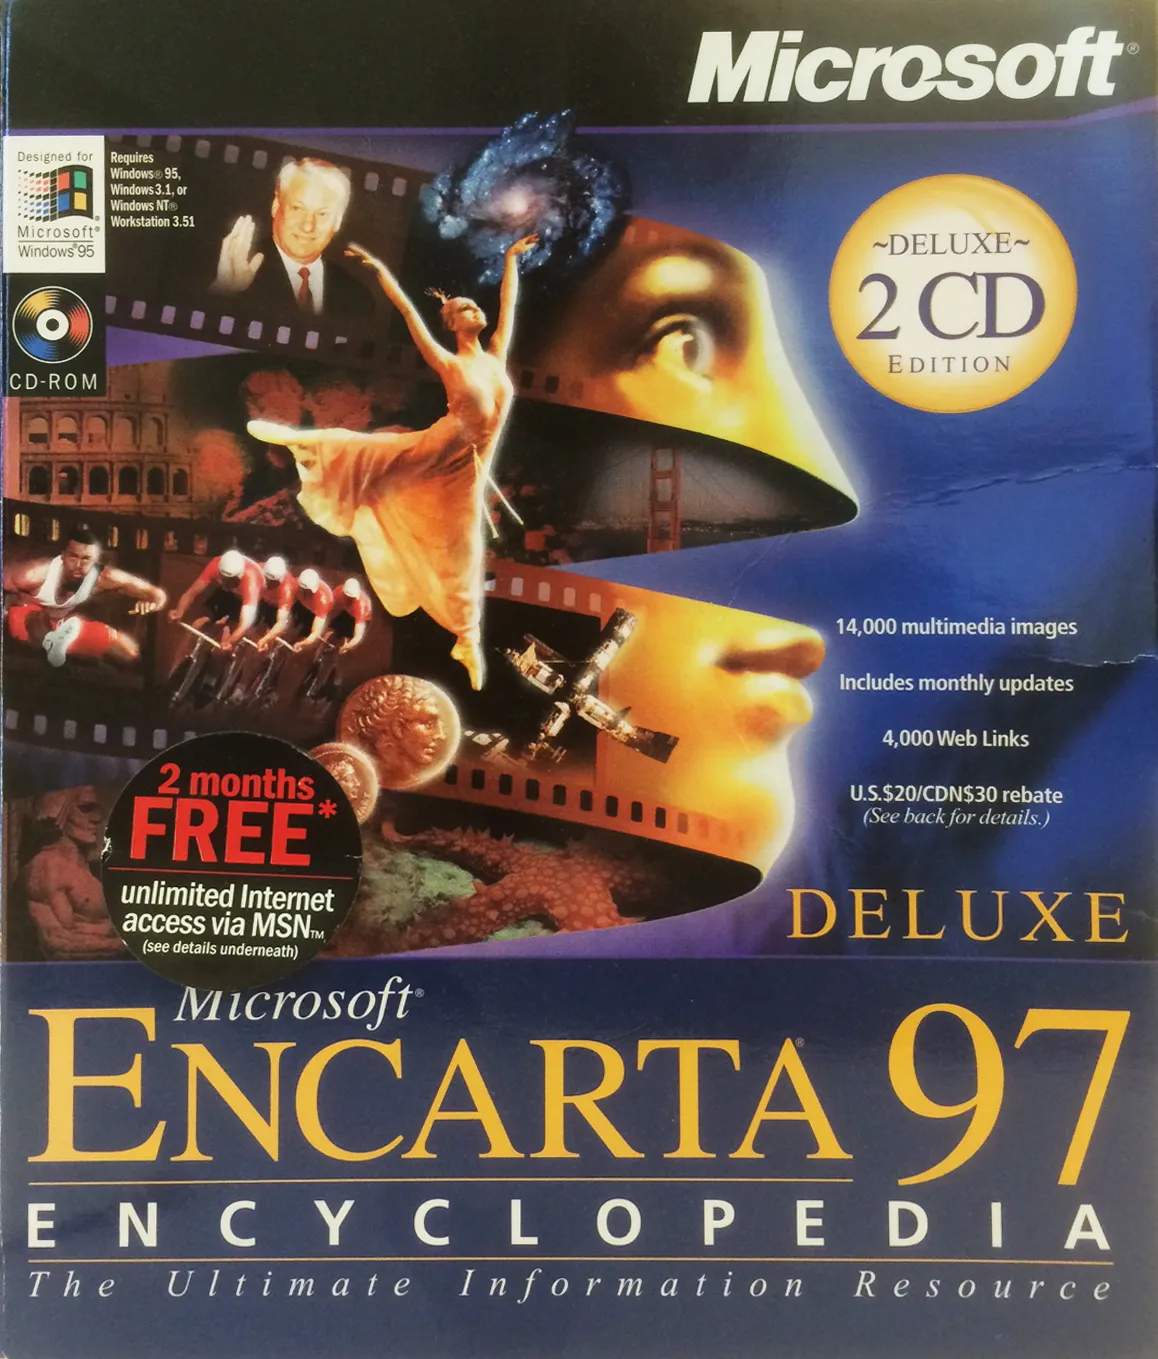 What Ever Happened to Microsoft Encarta? Exploring the Legacy of the CD-ROM Encyclopedia